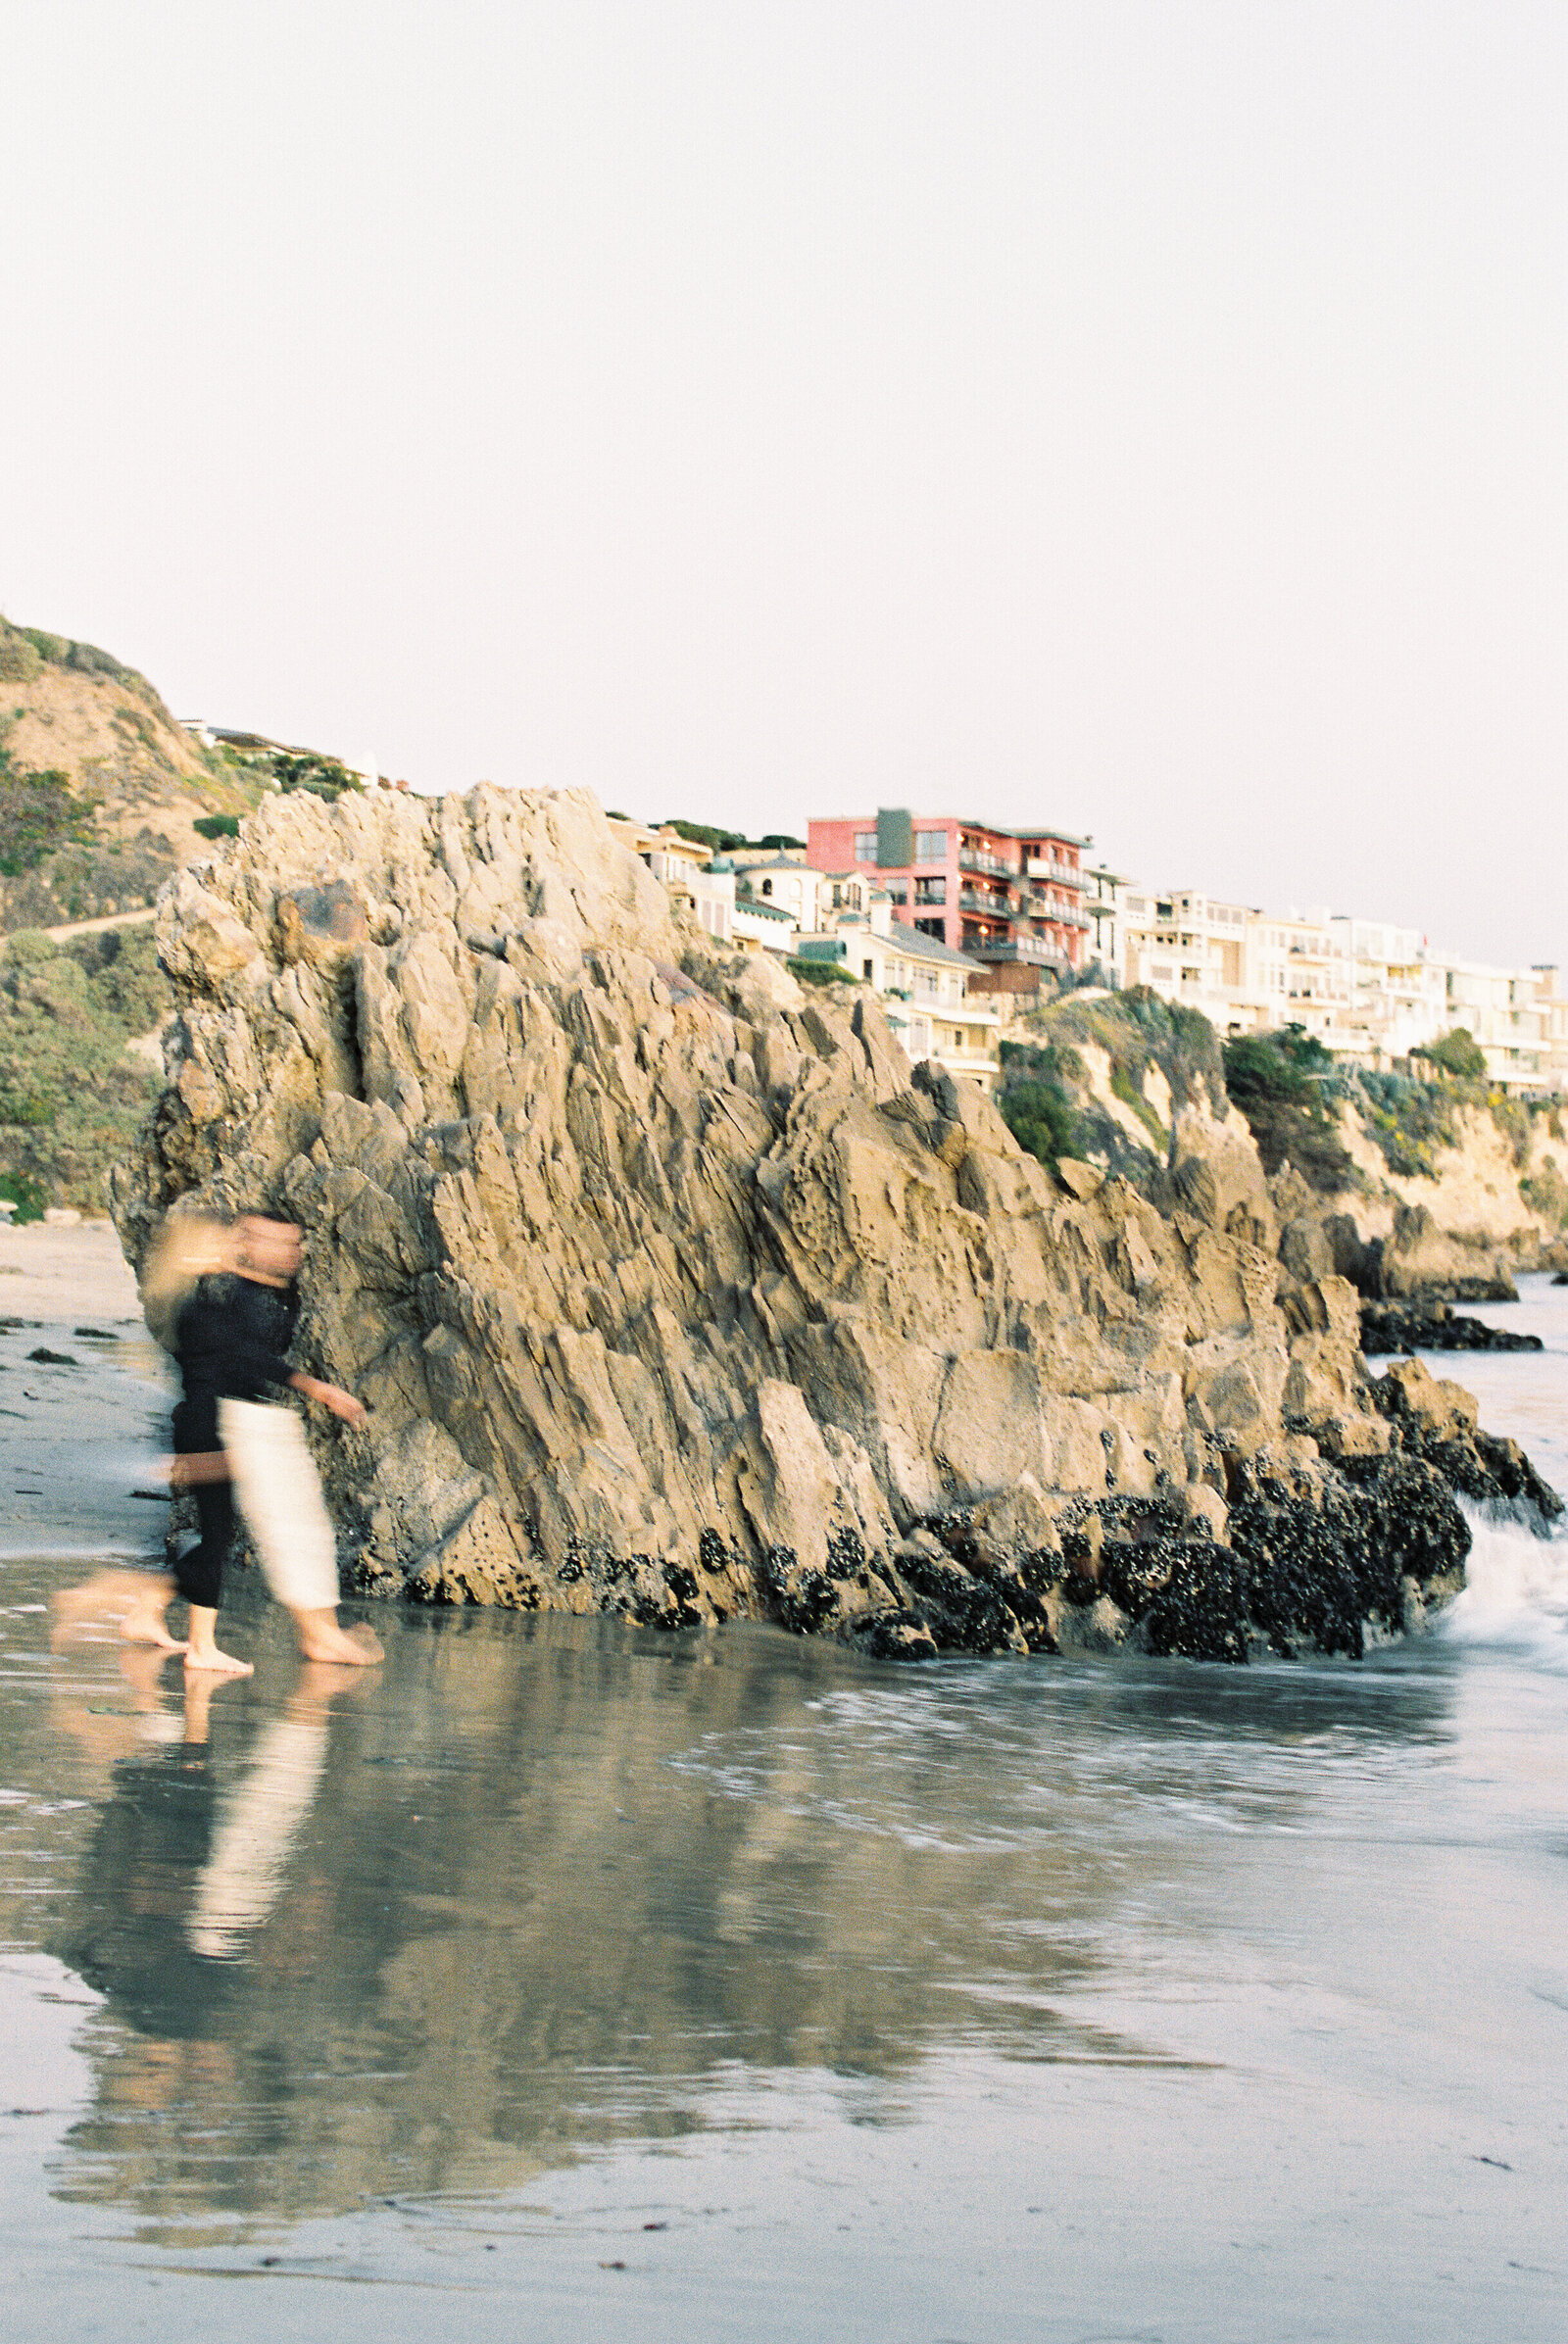 Blurred image of  a couple walking along the beach in front of a large rock.